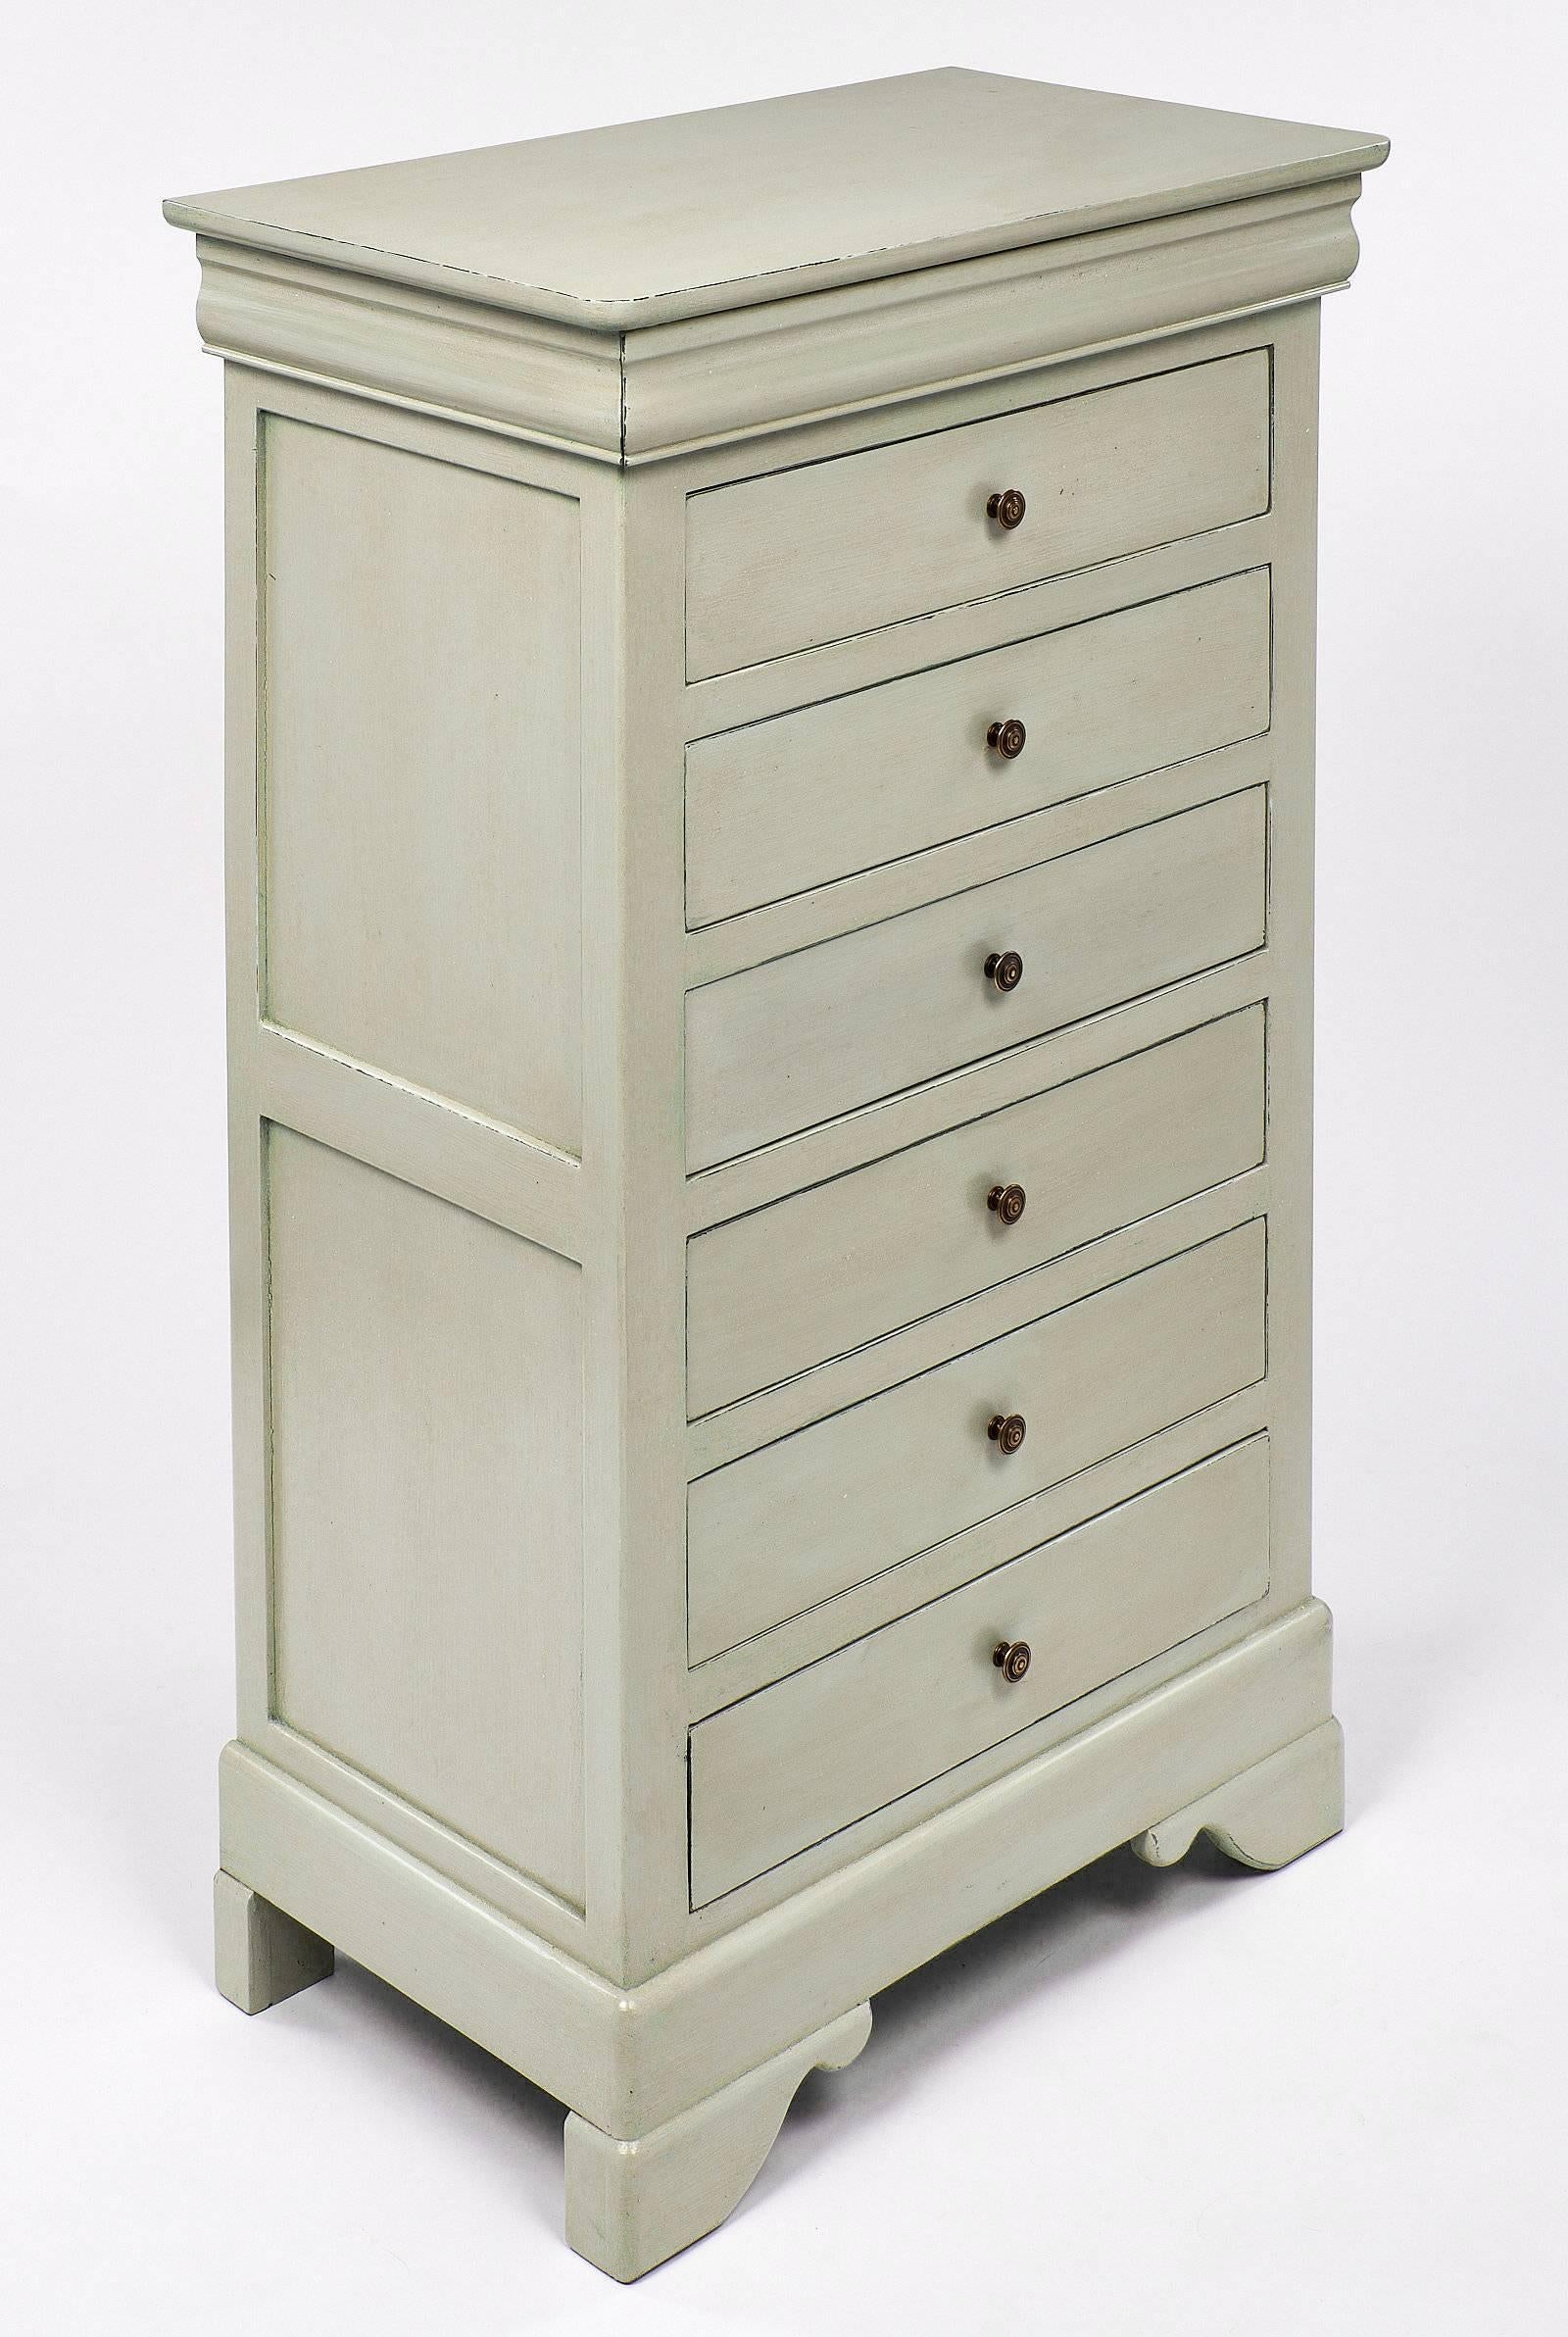 Louis Philippe semainier made of solid walnut, hand painted and patinated light green. This piece has six large dovetailed drawers. These are topped with a hidden drawer, a classical “doucine